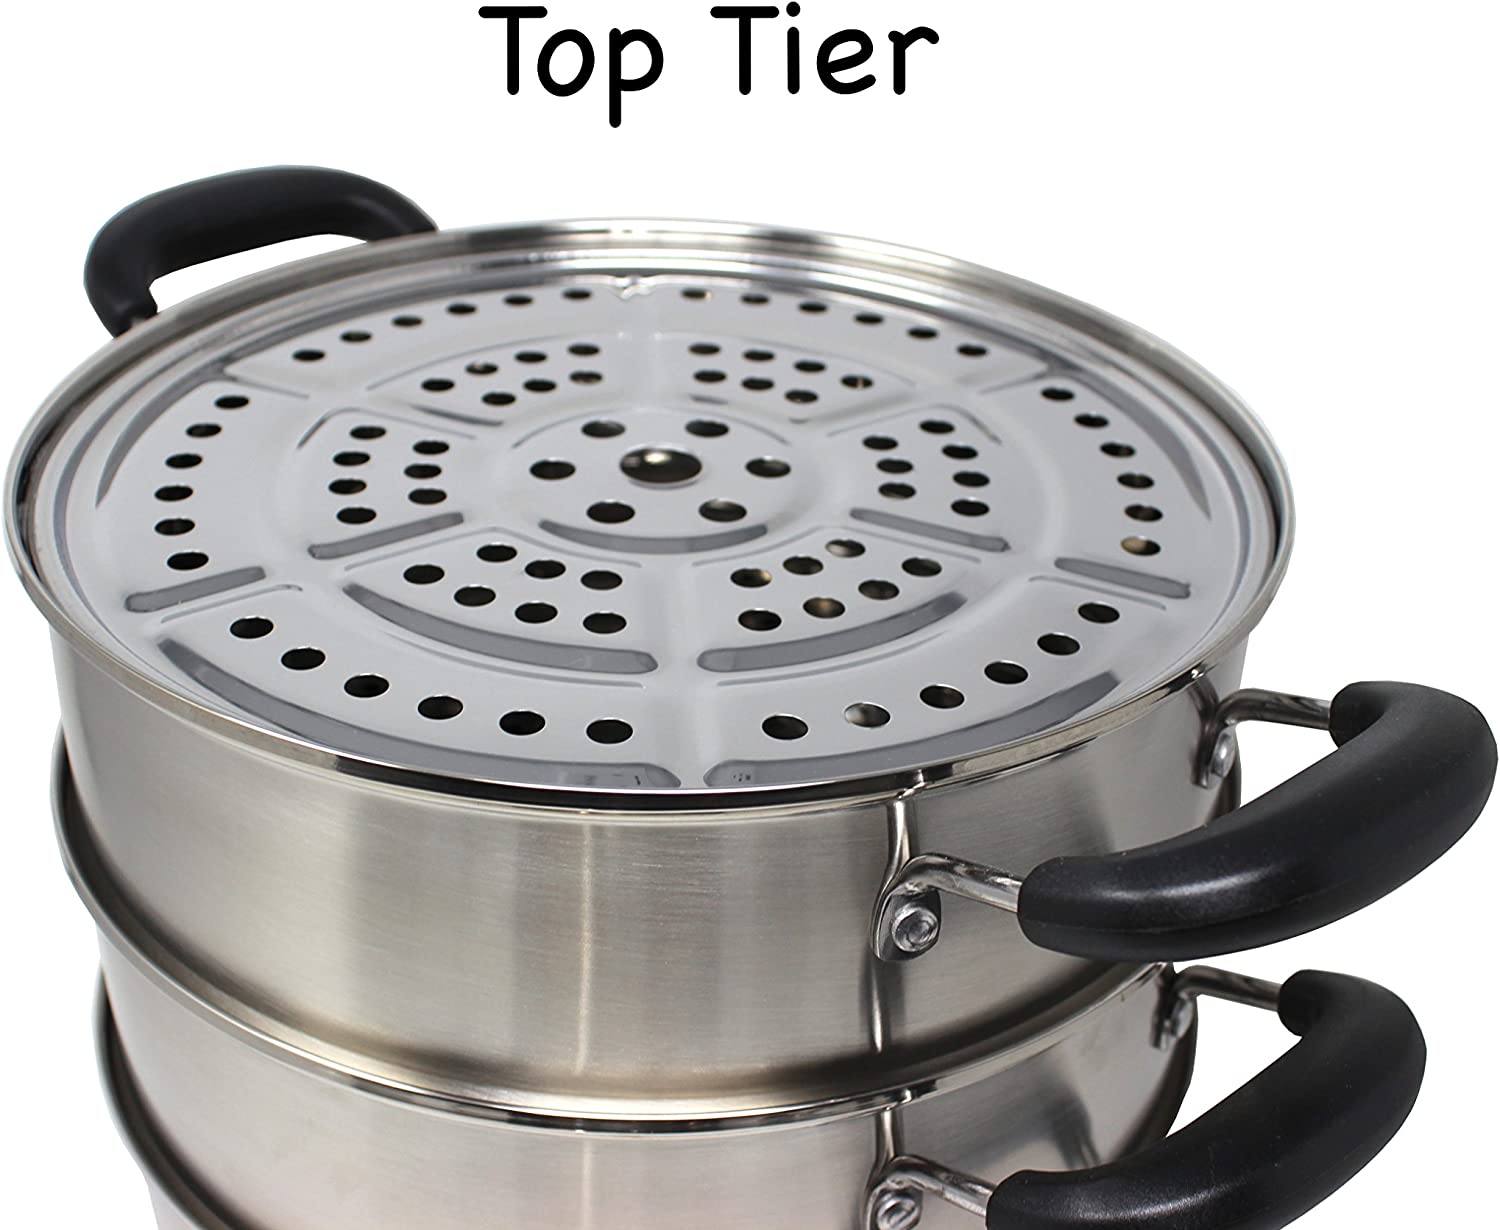 Concord 30 CM Stainless Steel 3 Tier Steamer Pot Steaming Cookware - Triply  Bottom